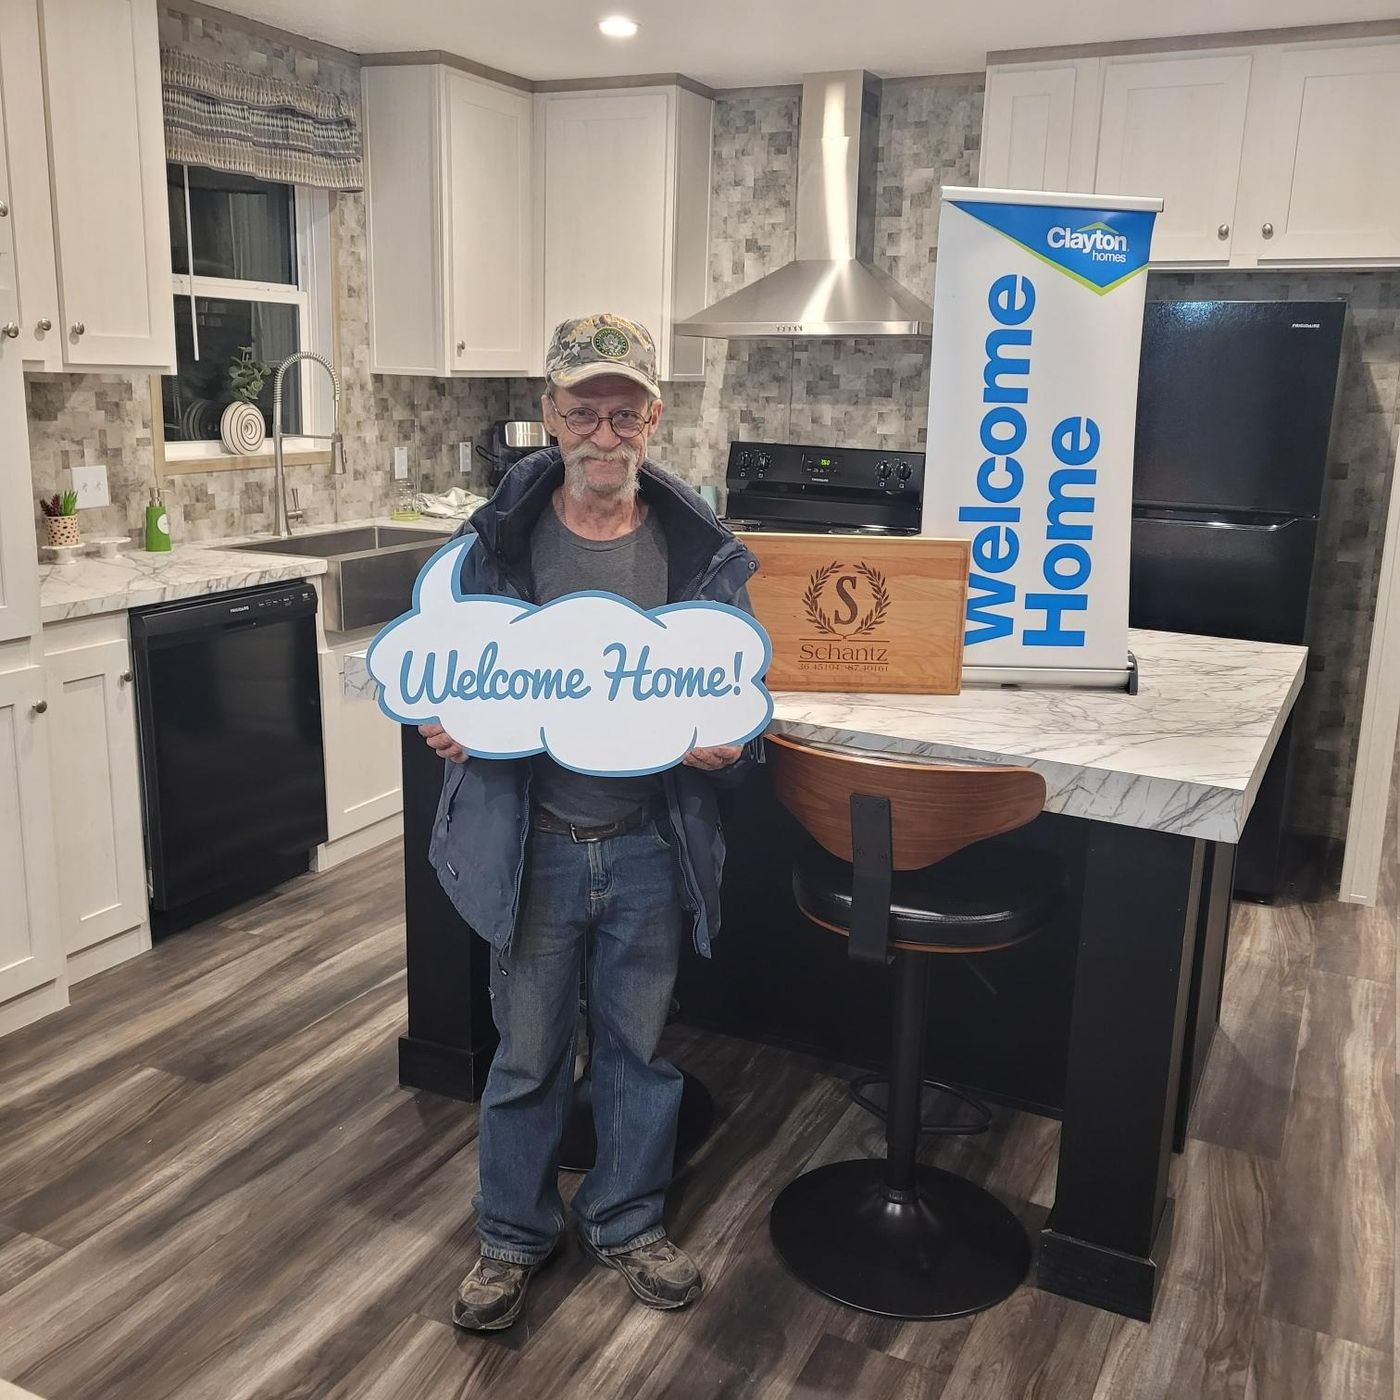 DALE S. welcome home image